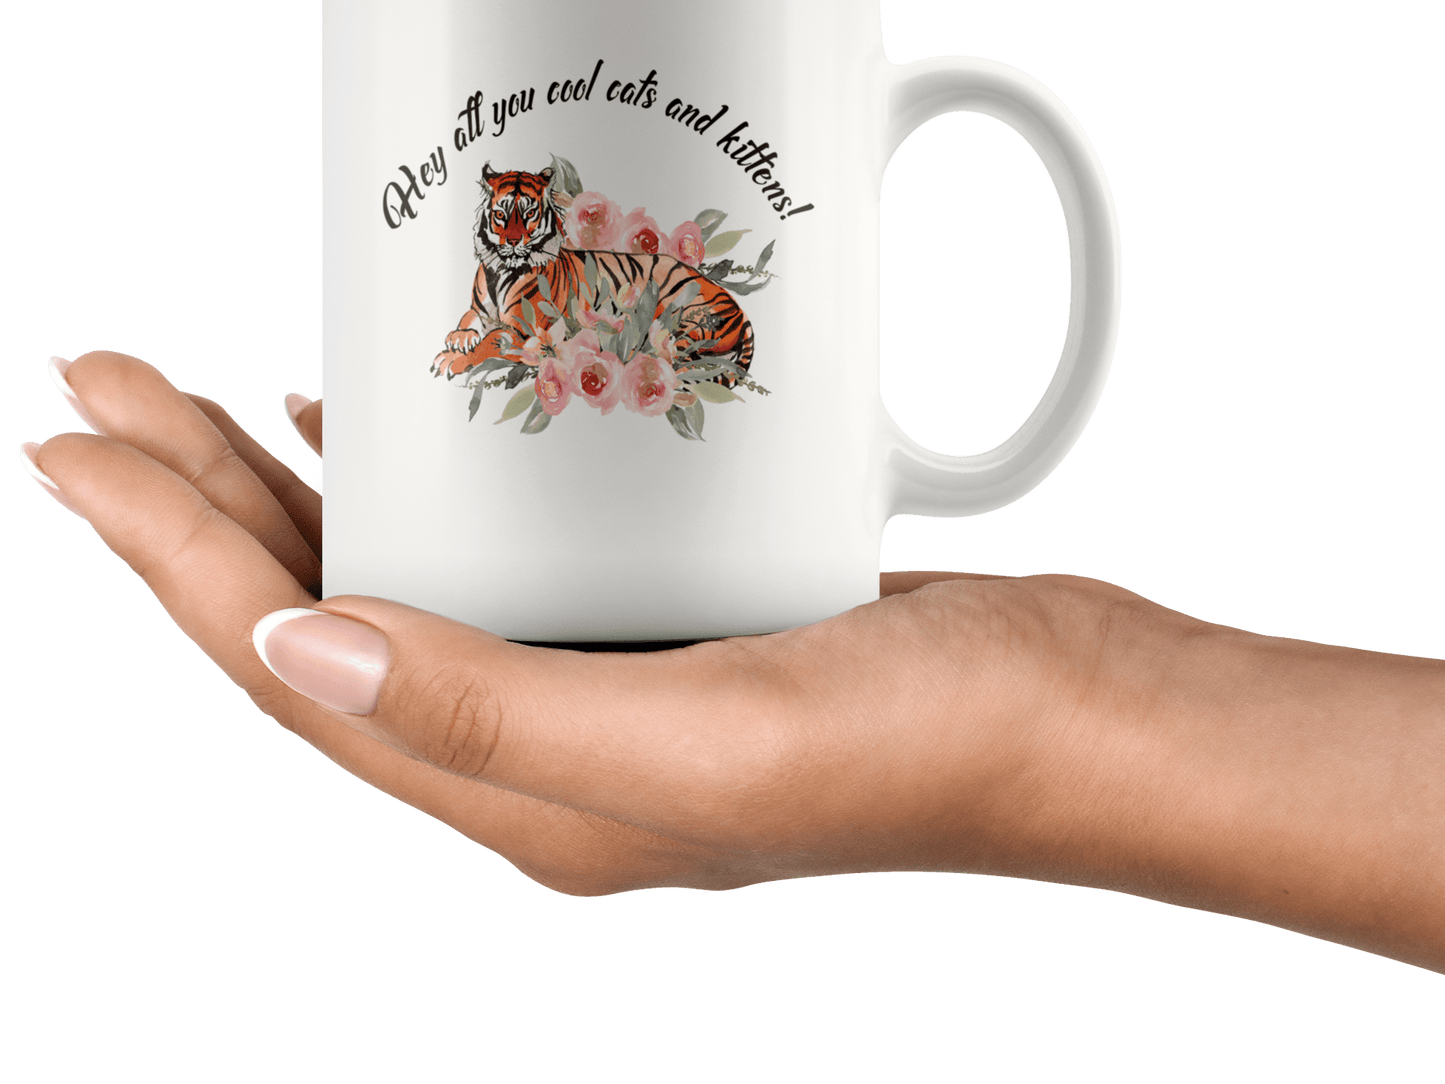 Hey All You Cool Cats and Kittens Floral Tiger Coffee Mug Gift